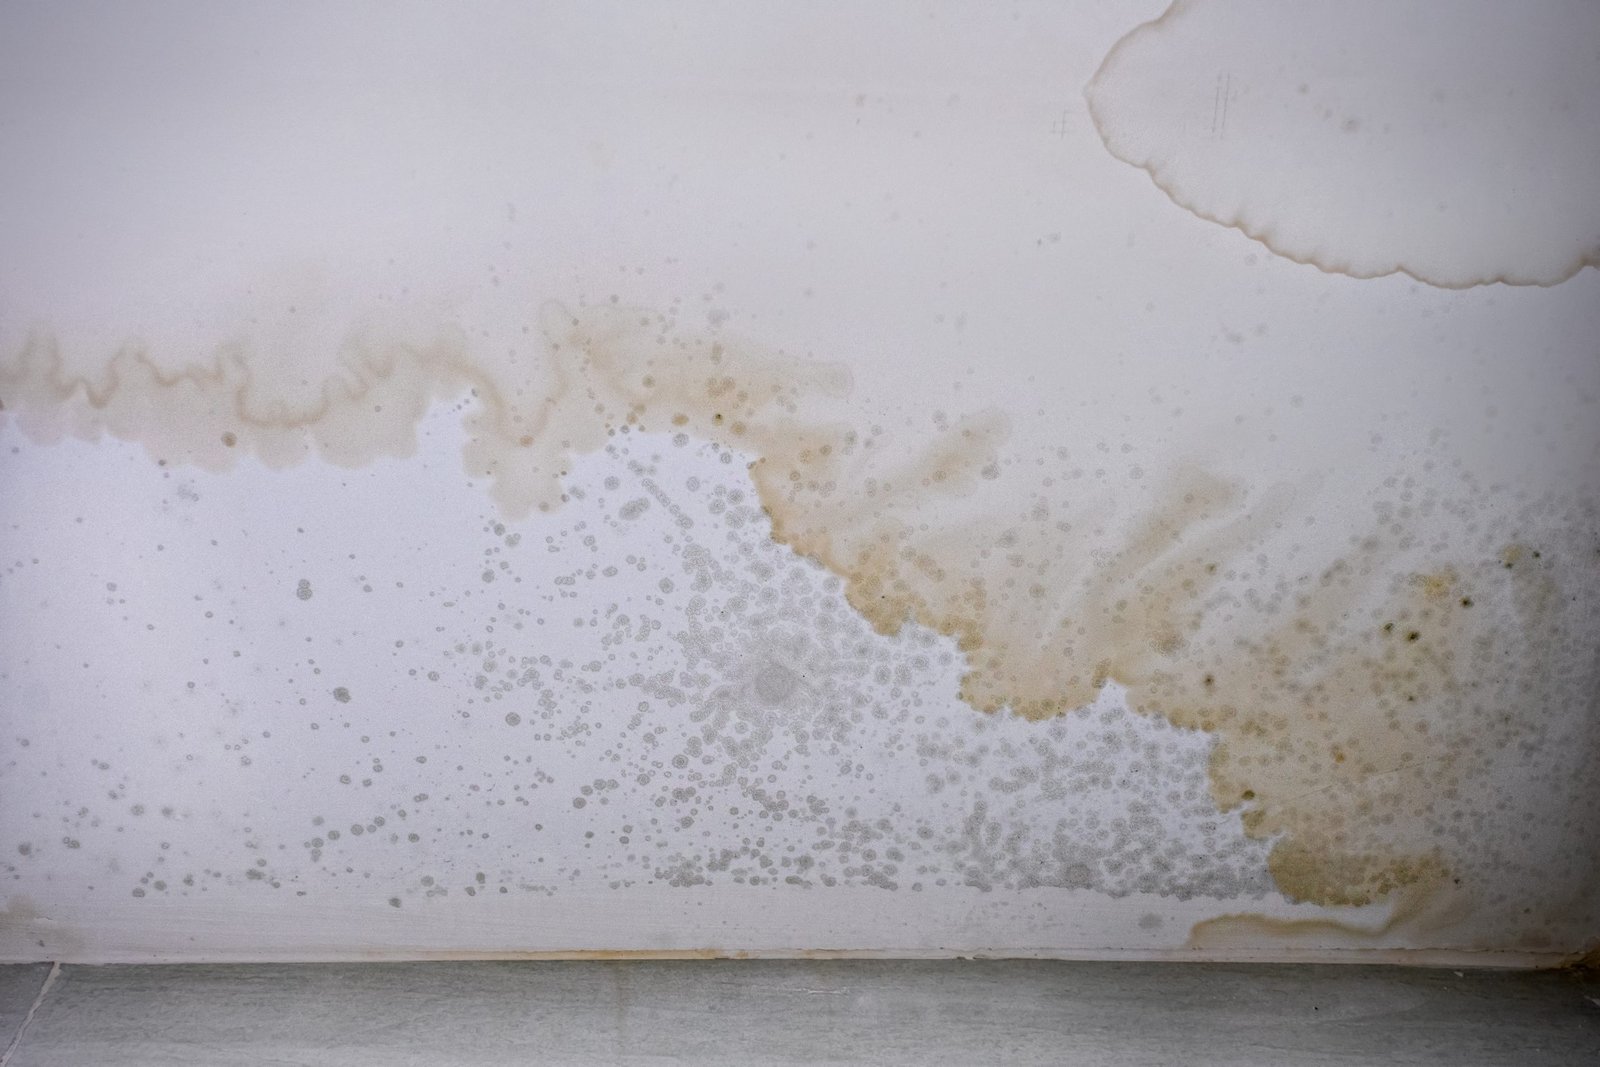 Exploring My Legal Options: Can I Sue My Landlord for Mold Exposure? Brown stain of indoor mold and fungus on the ceiling.